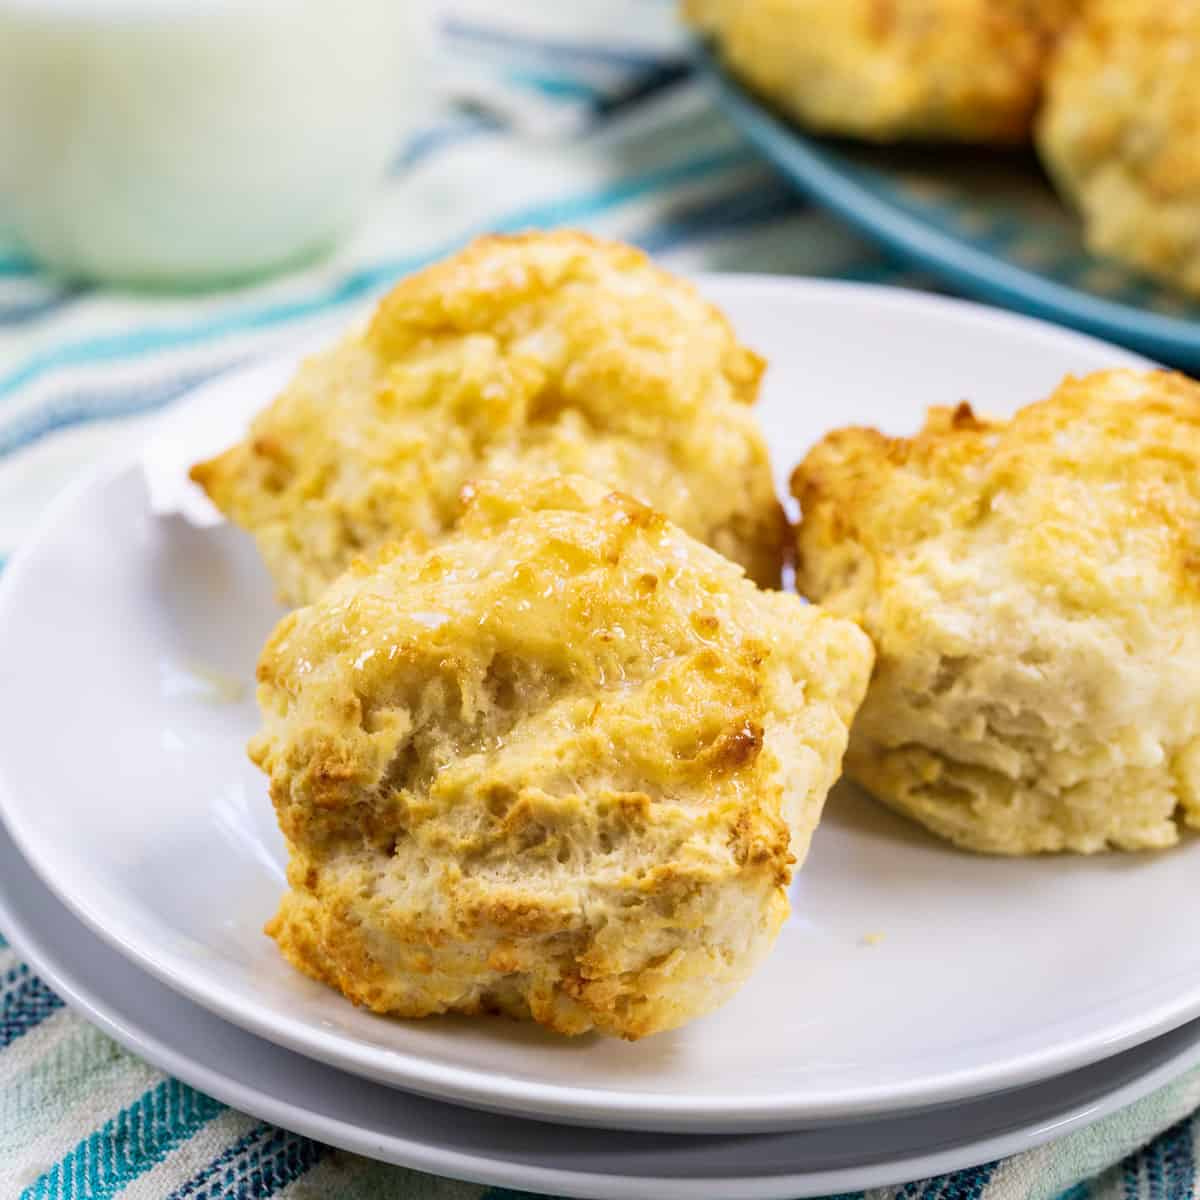 Three Buttermilk Drop Biscuits on a plate.